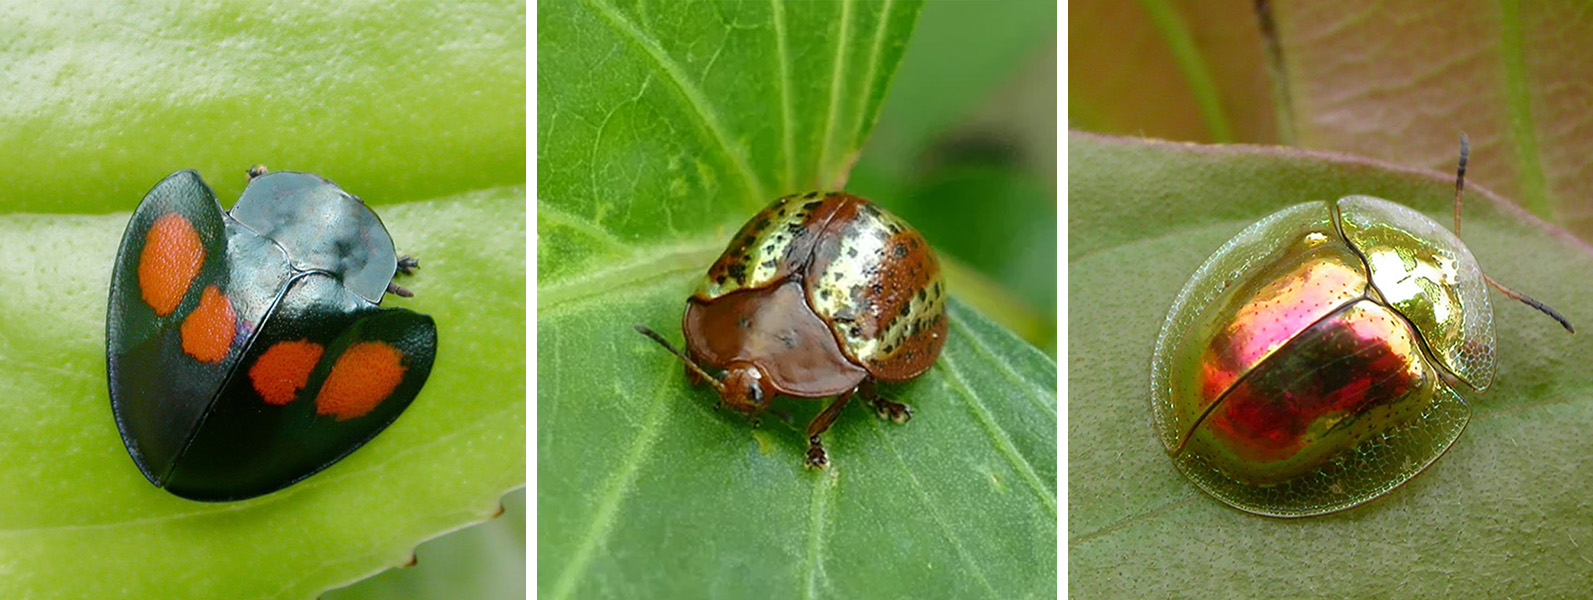 Three photos show small, round, flying insects perched on green leaves.